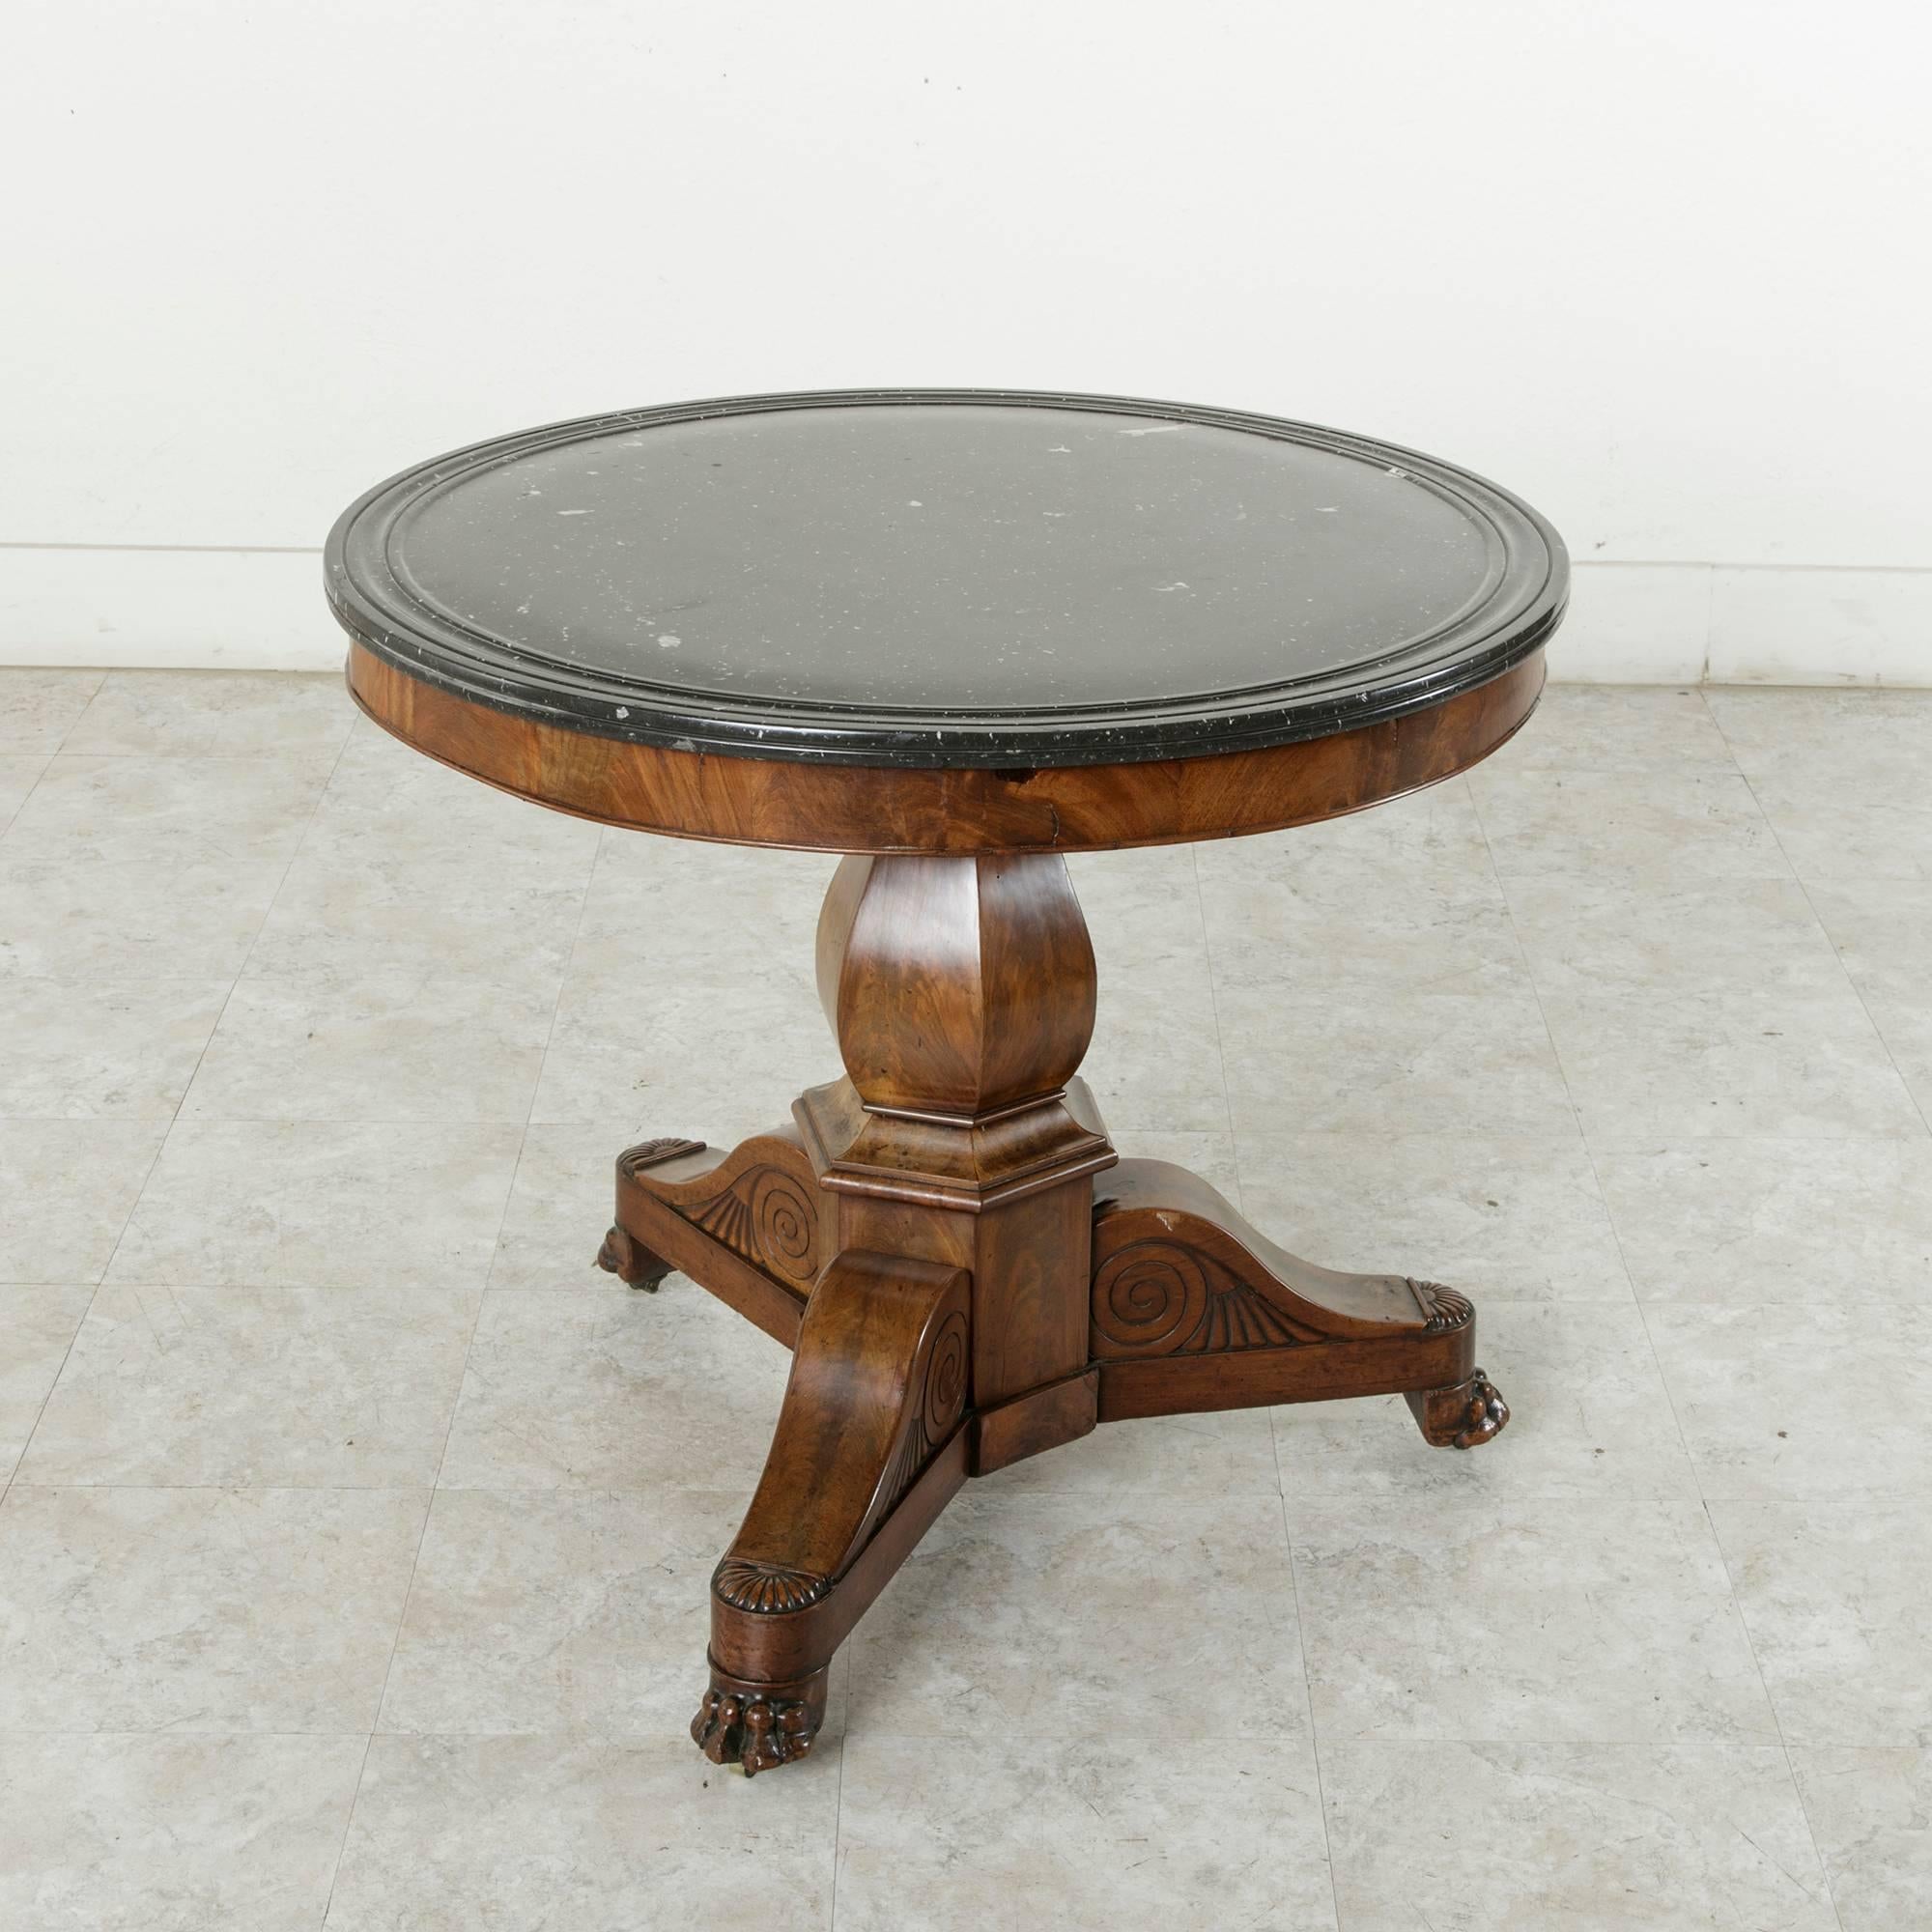 This mid-nineteenth century French Restauration period flamed mahogany gueridon rests on a tripod pedestal with claw feet and casters. Its black and white soapstone top features a multi-beveled edge. This circa 1850 piece is of an ideal size as